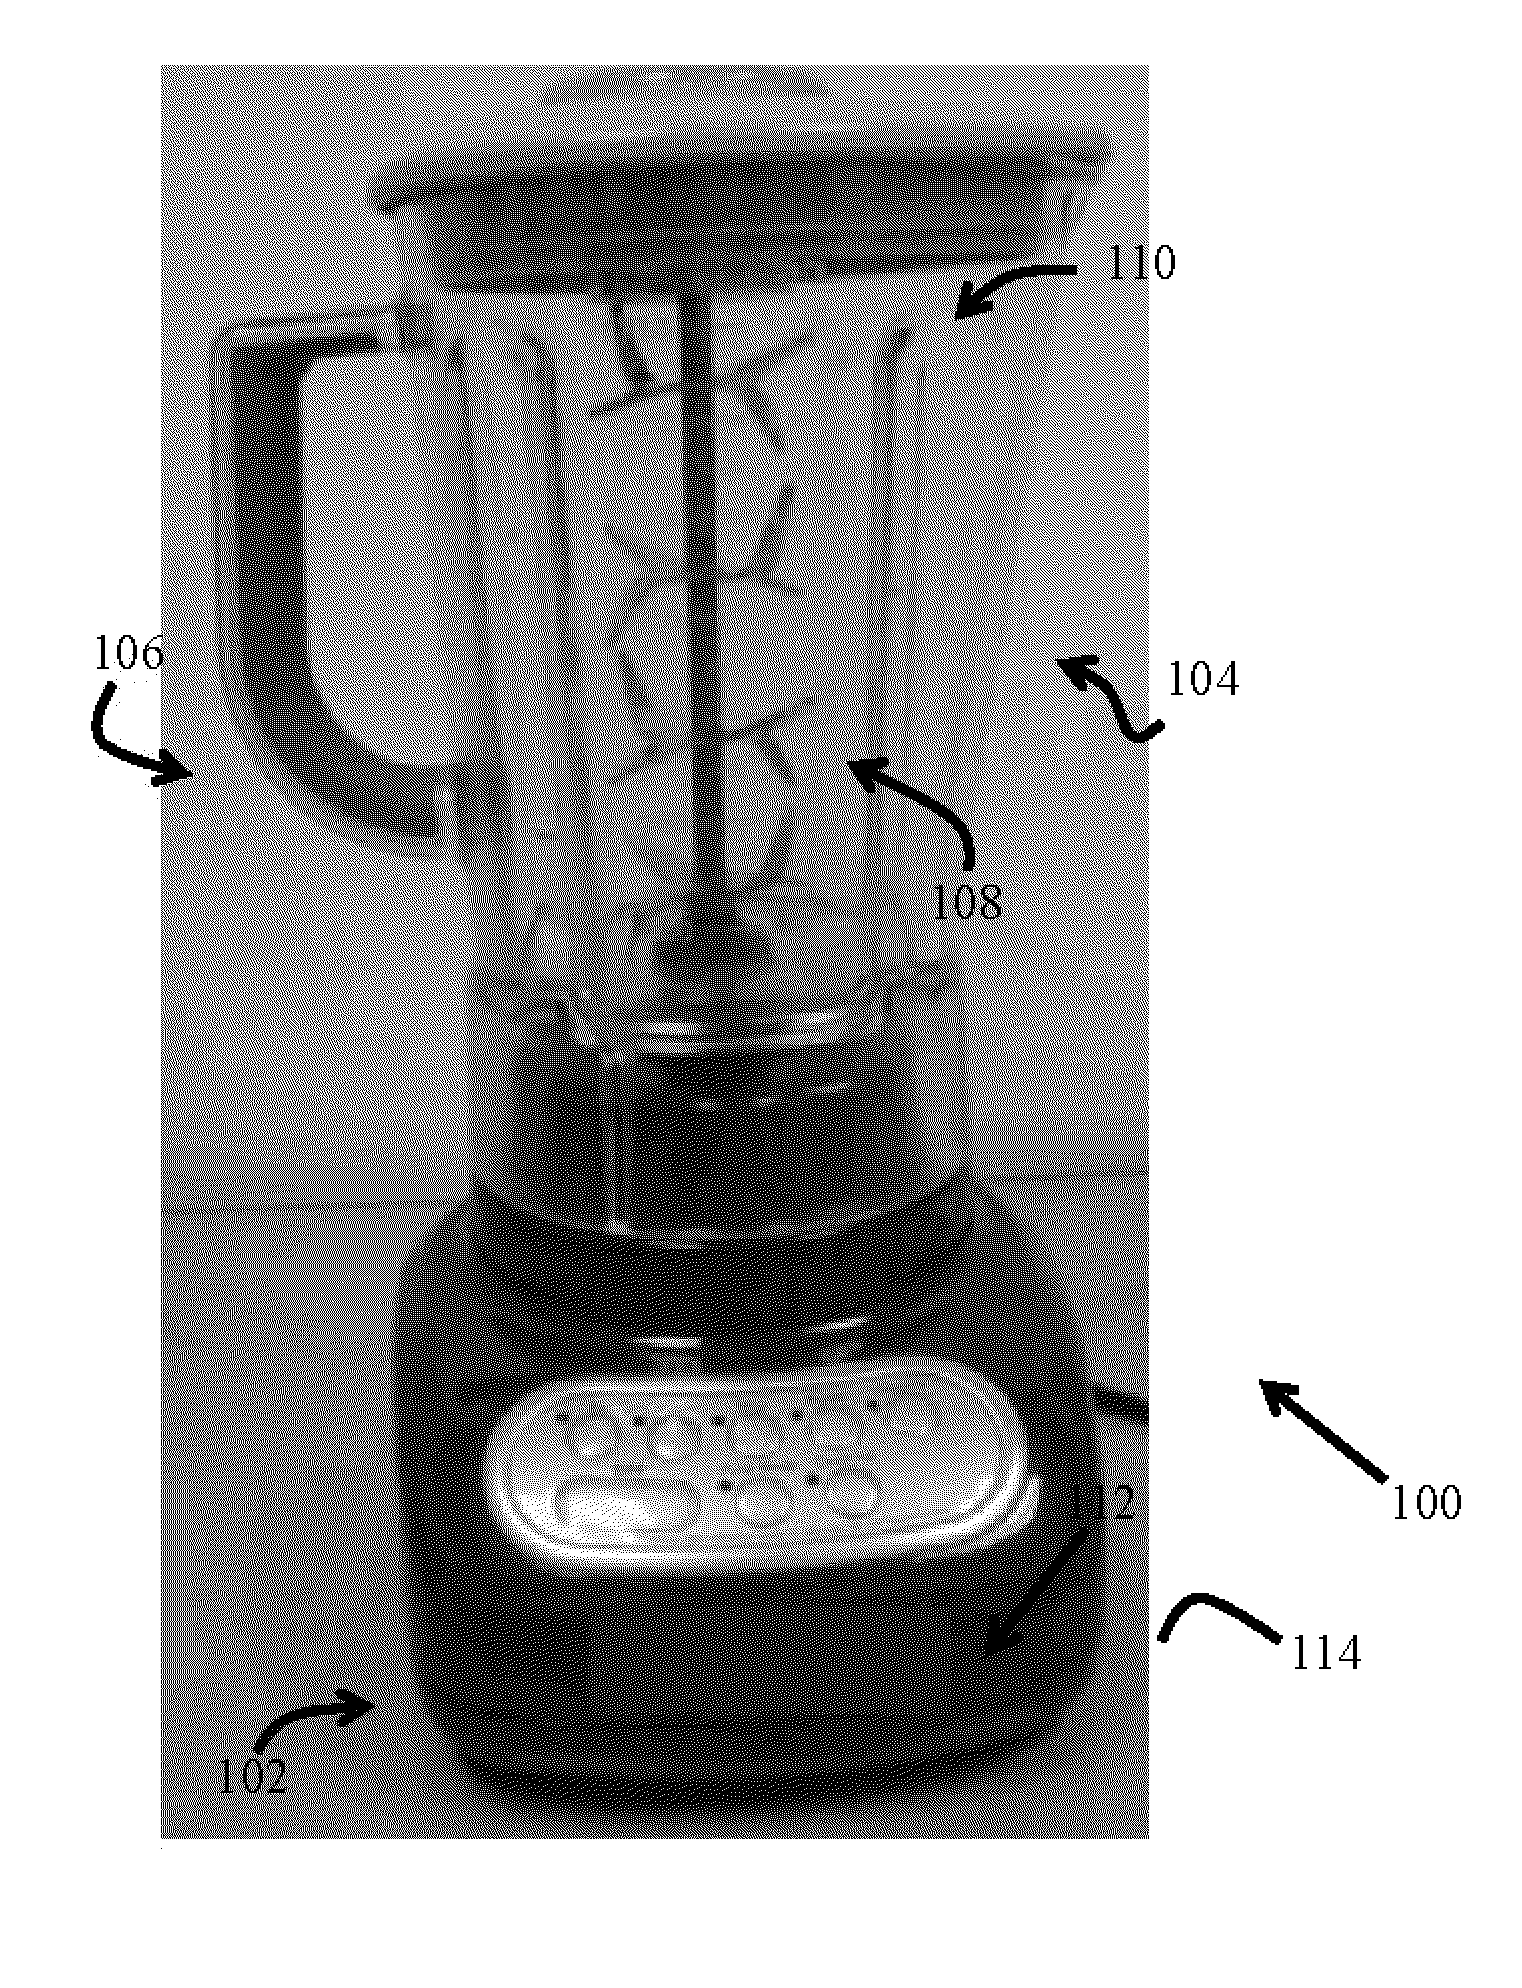 Blender and food processor device